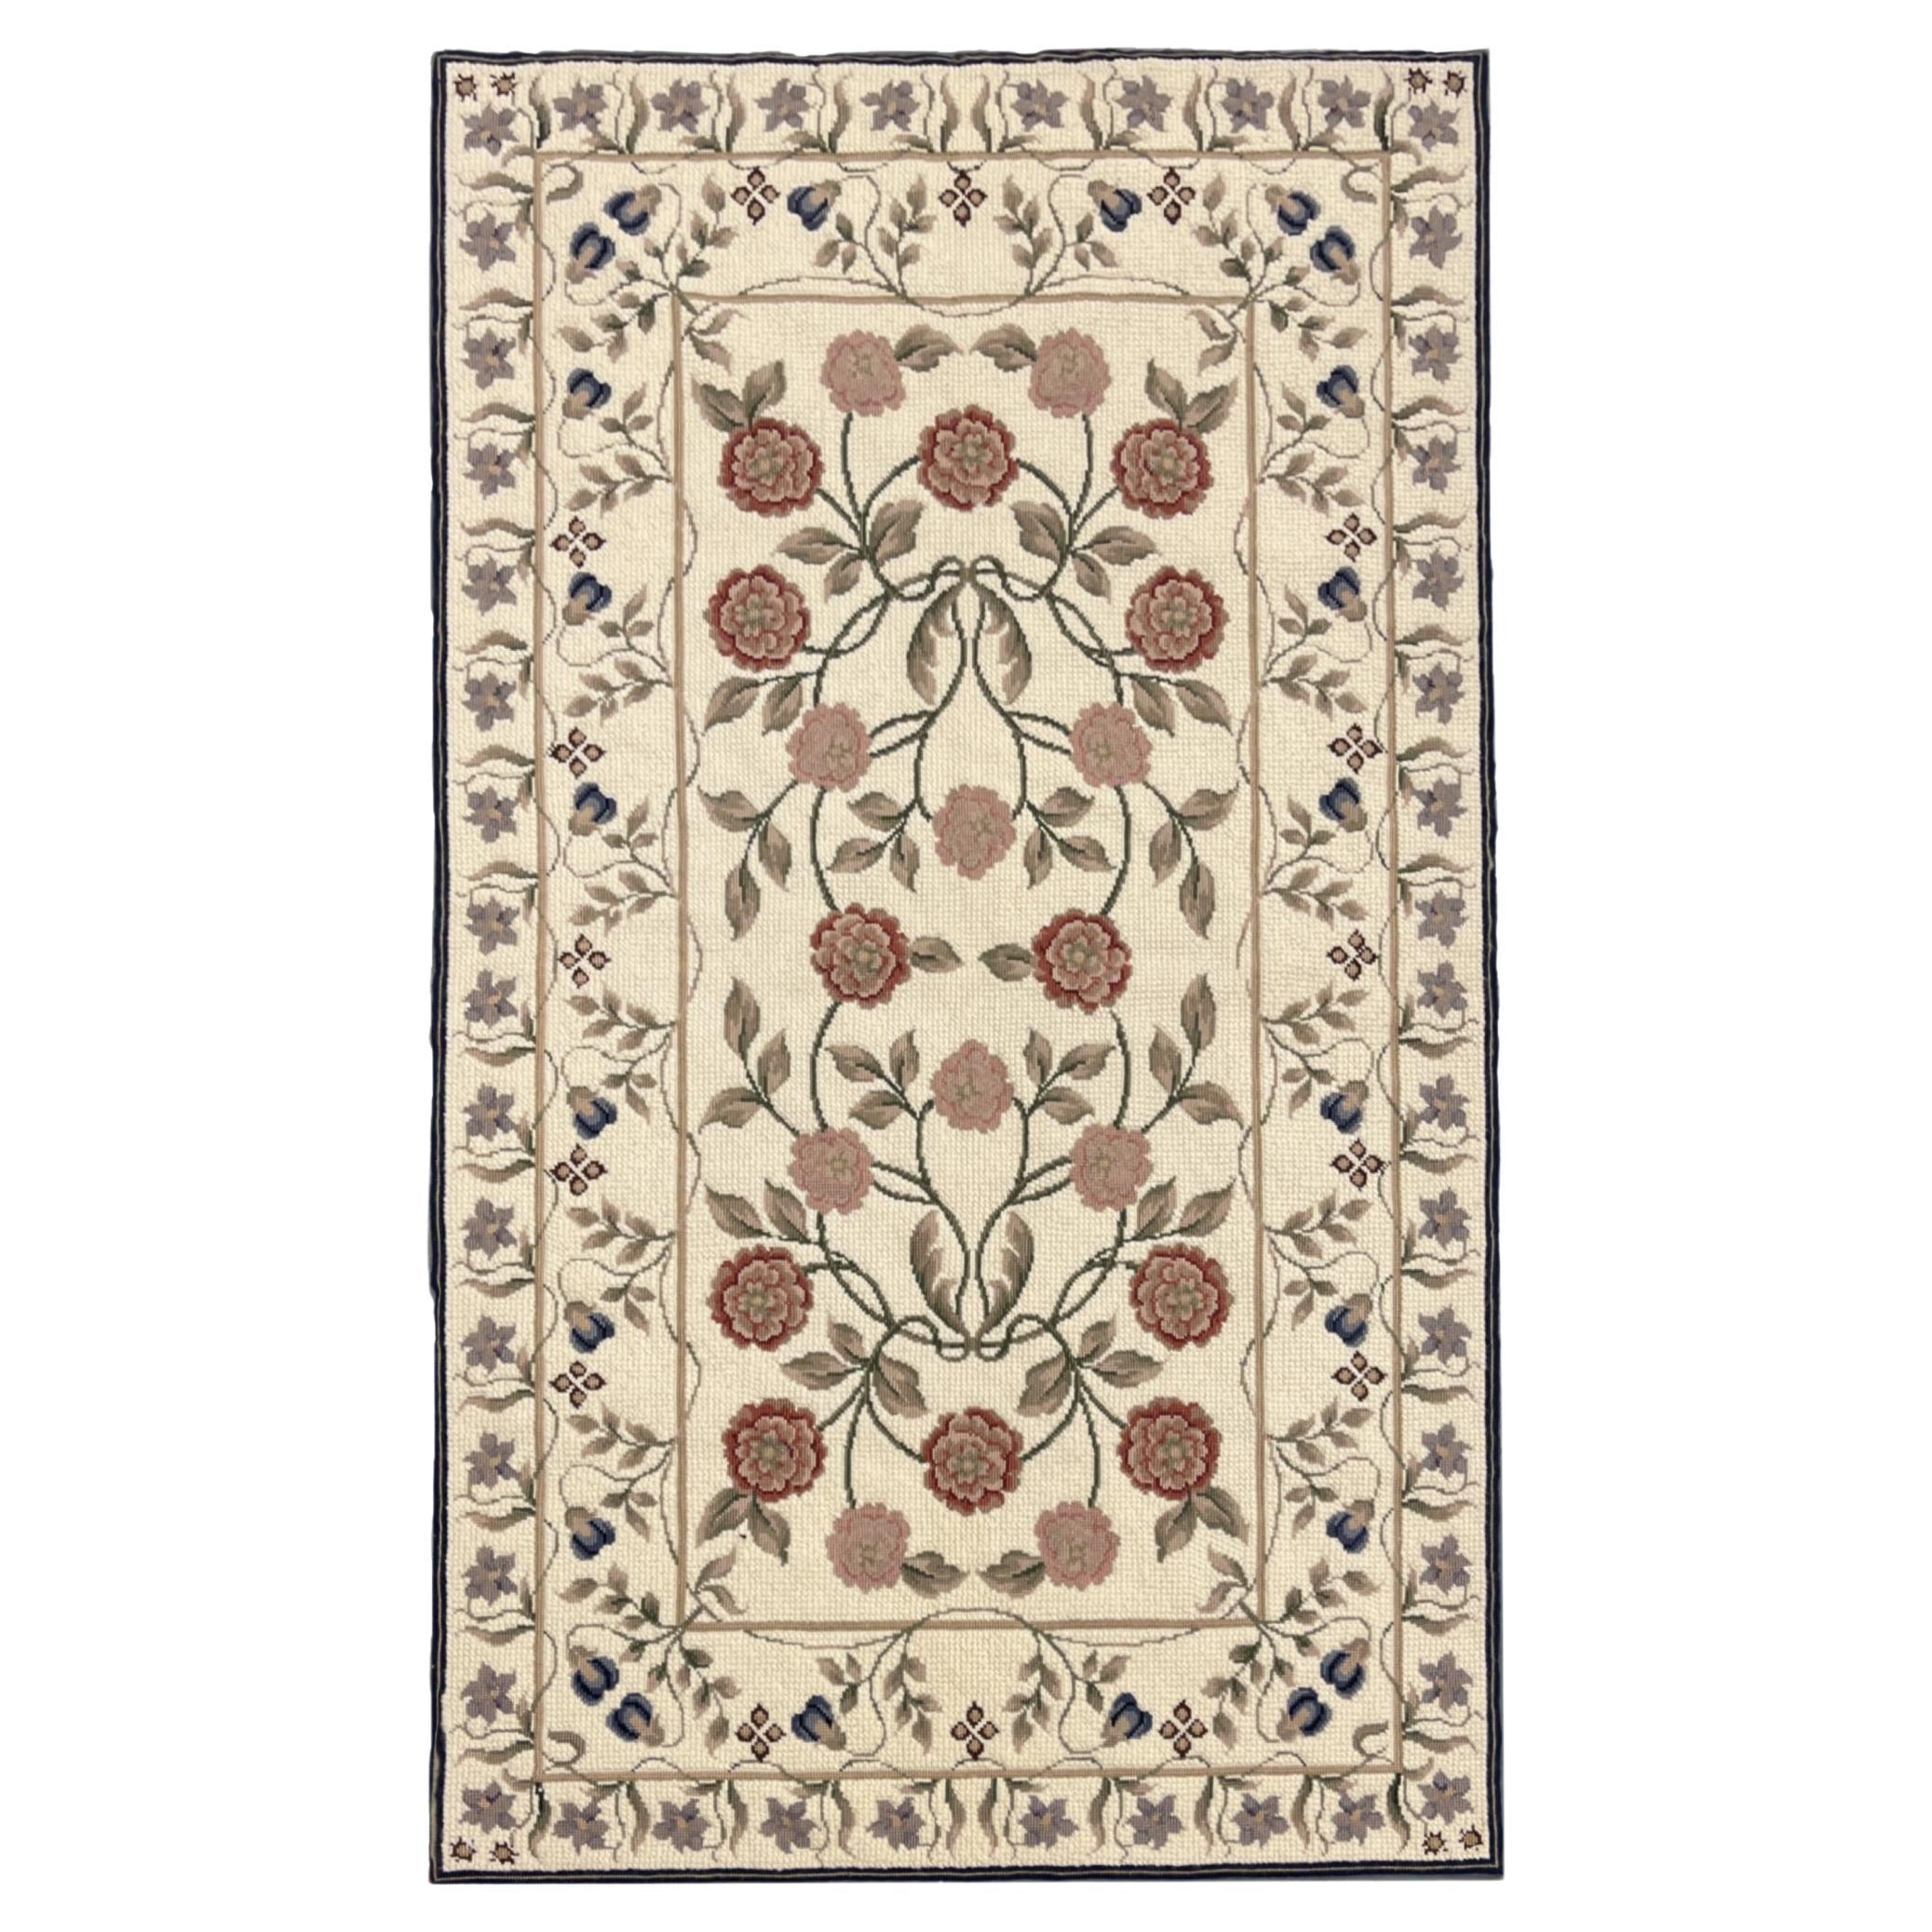 Traditional Carpet Floral Aubusson Rug Handwoven Wool Needlepoint Rug Home Decor